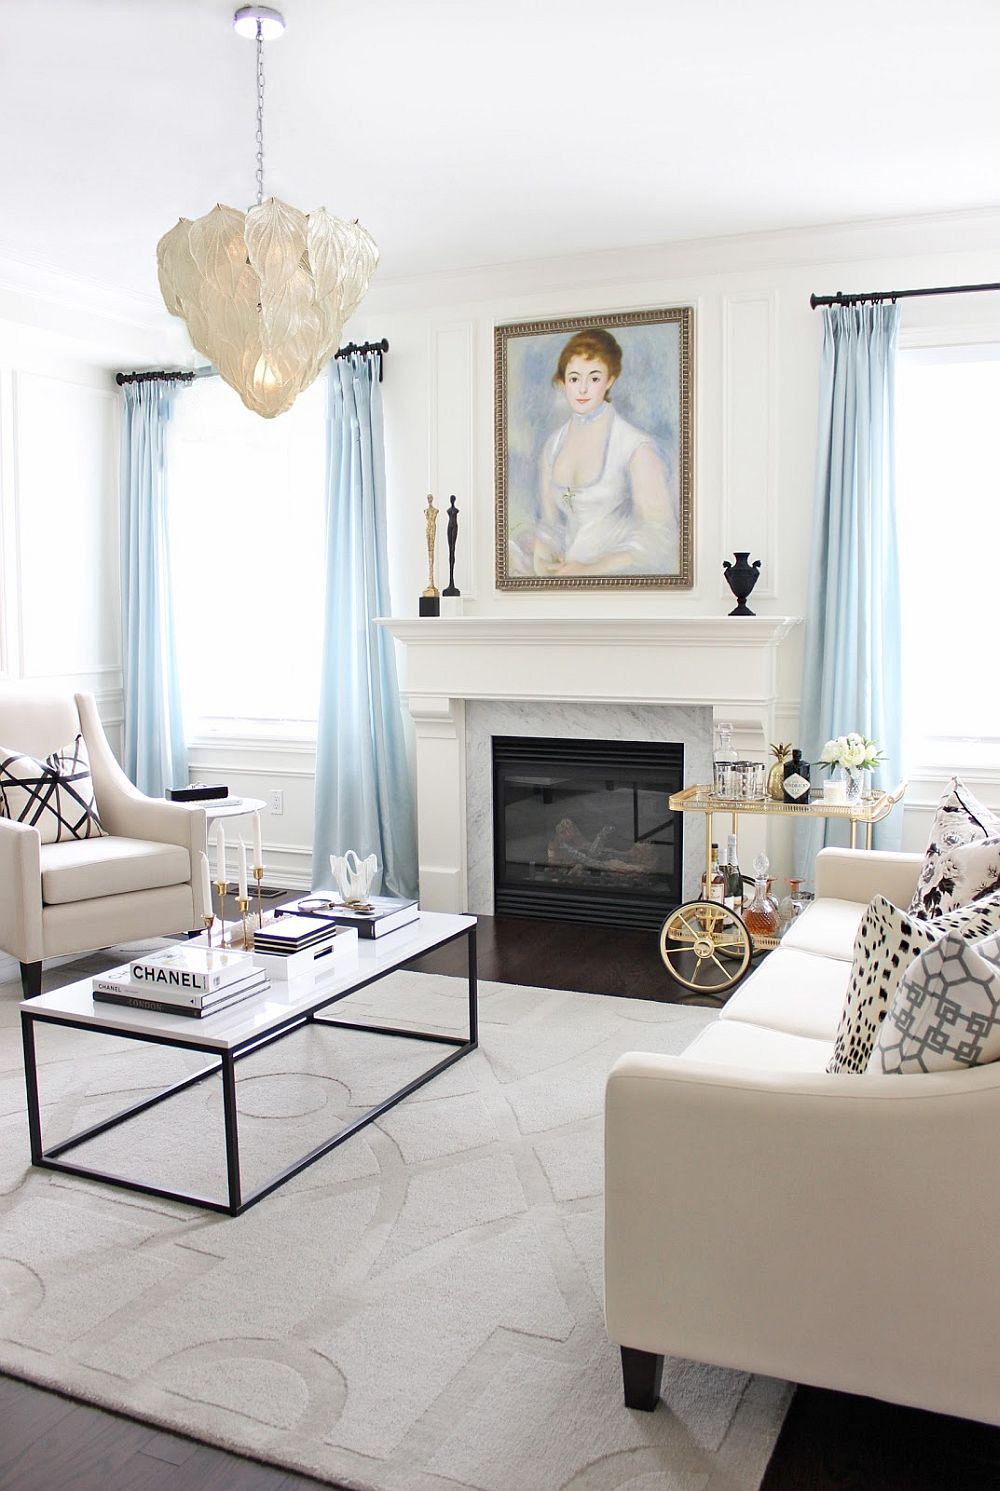 Exquisite-living-room-in-white-with-light-blue-drapes-and-French-finesse